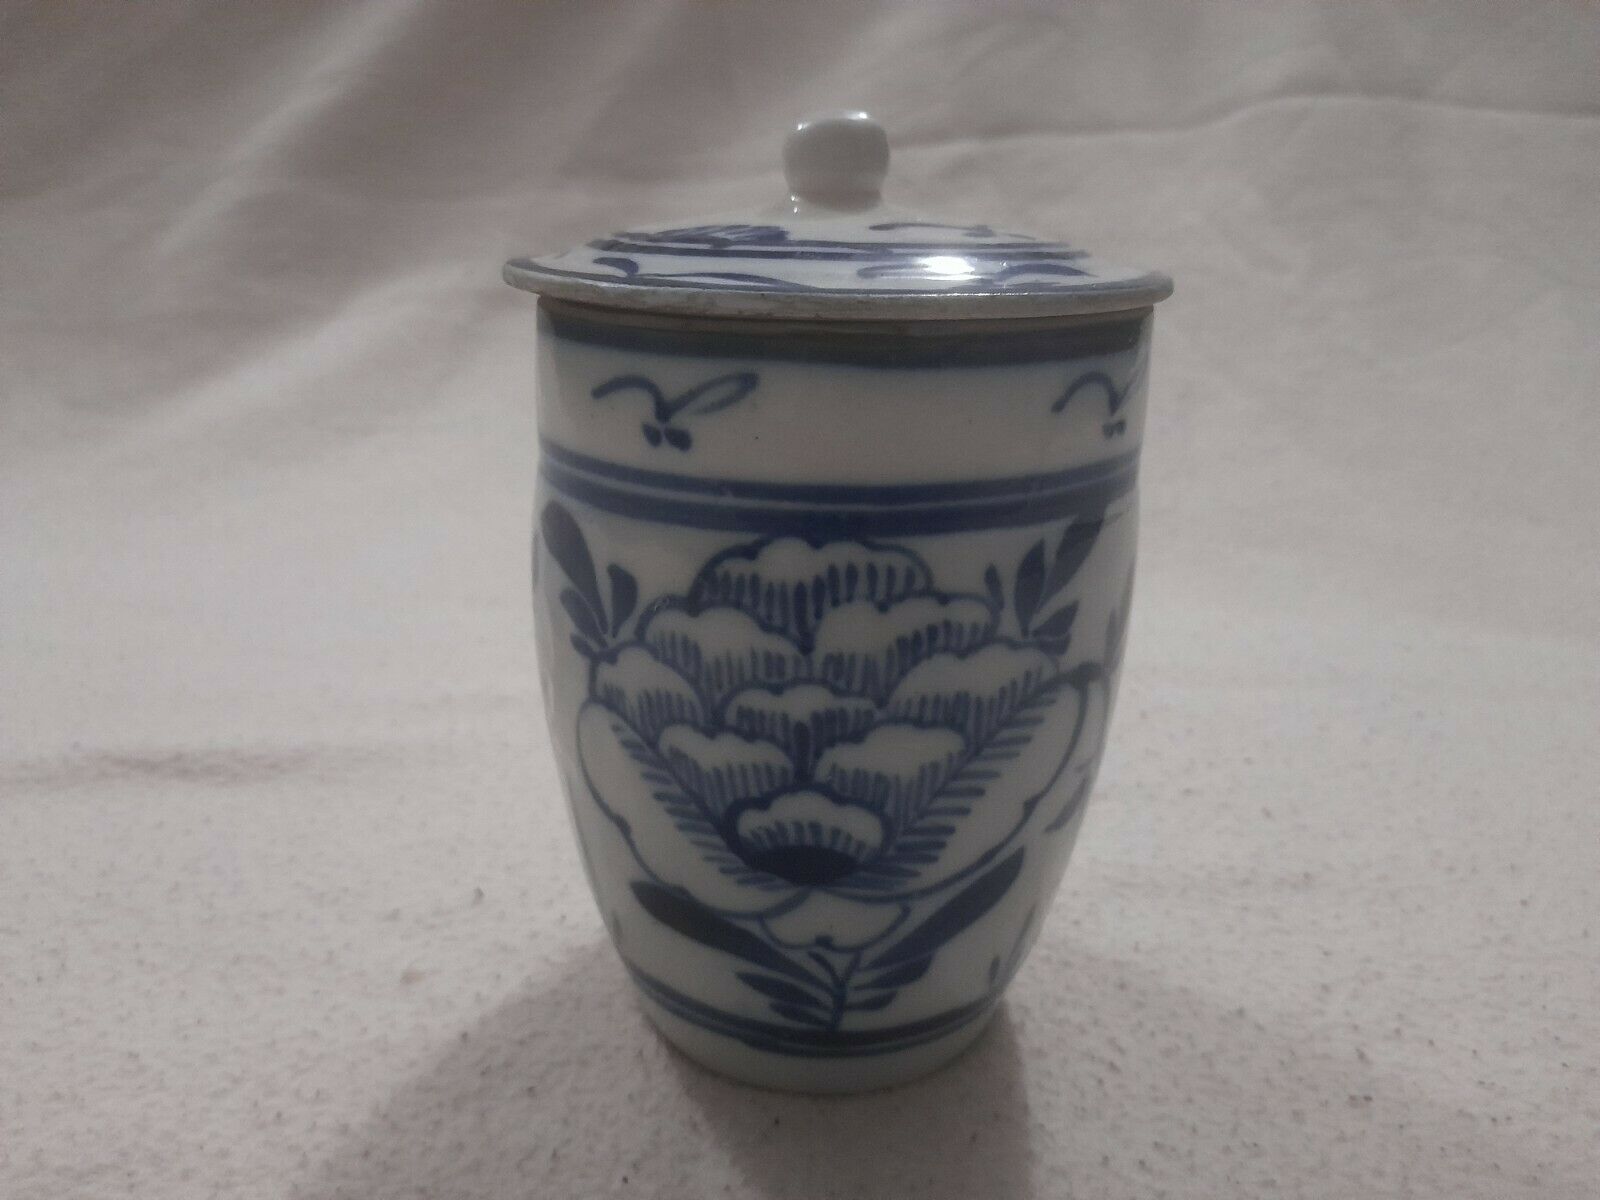 Antique Valuations: Blue And White Hand Painted Stoneware Jar With A Lid. Chinese In Origin